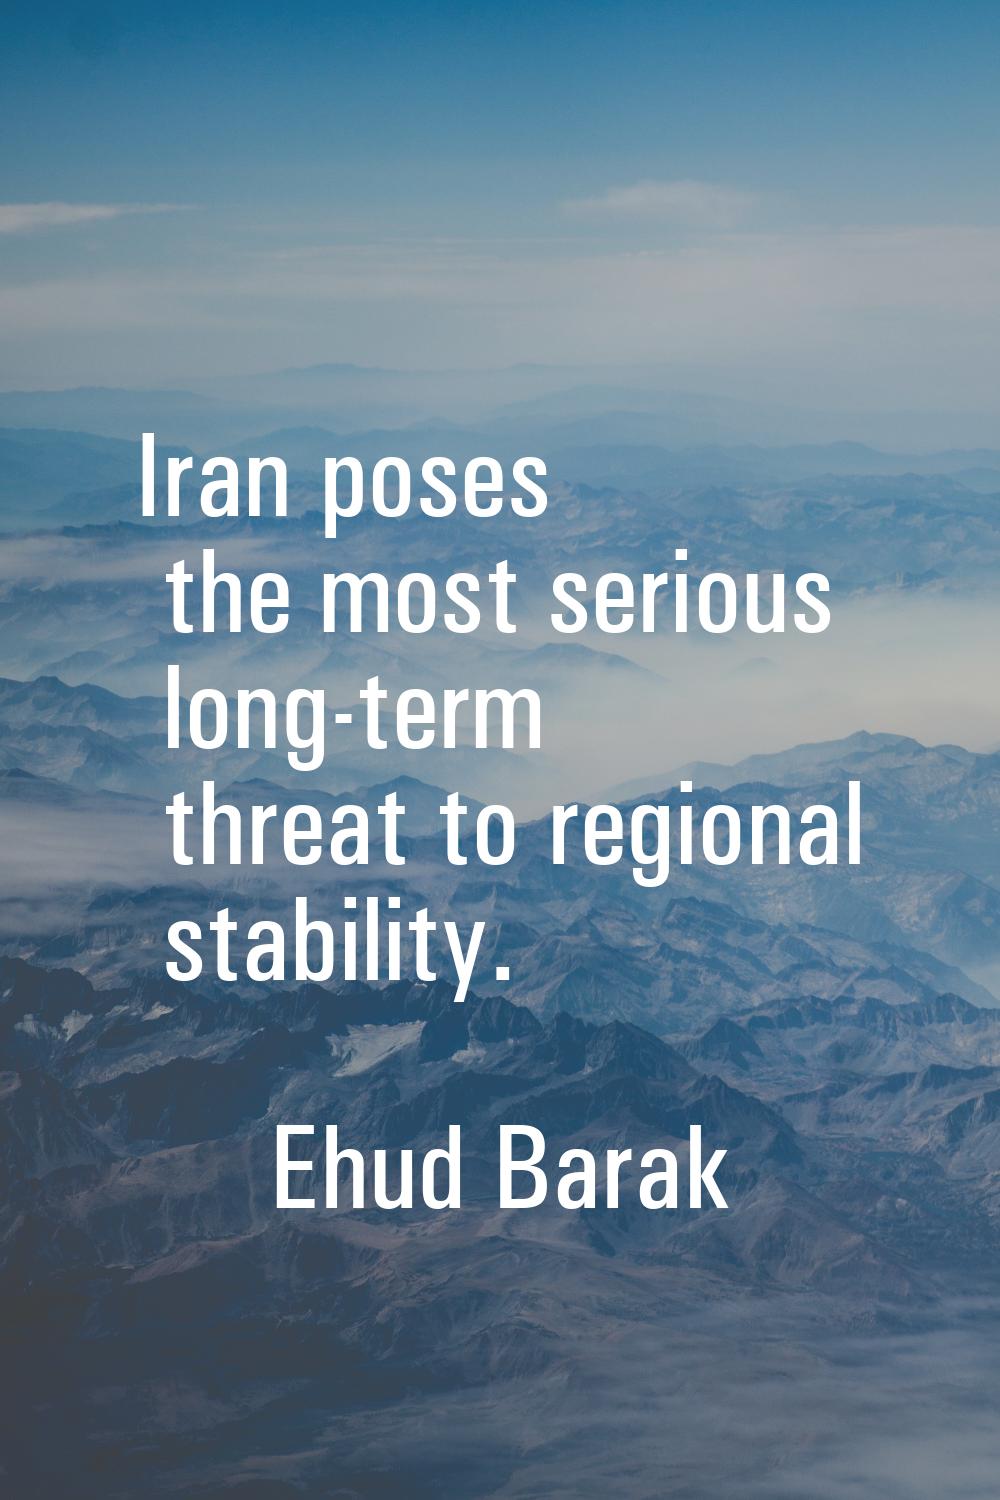 Iran poses the most serious long-term threat to regional stability.